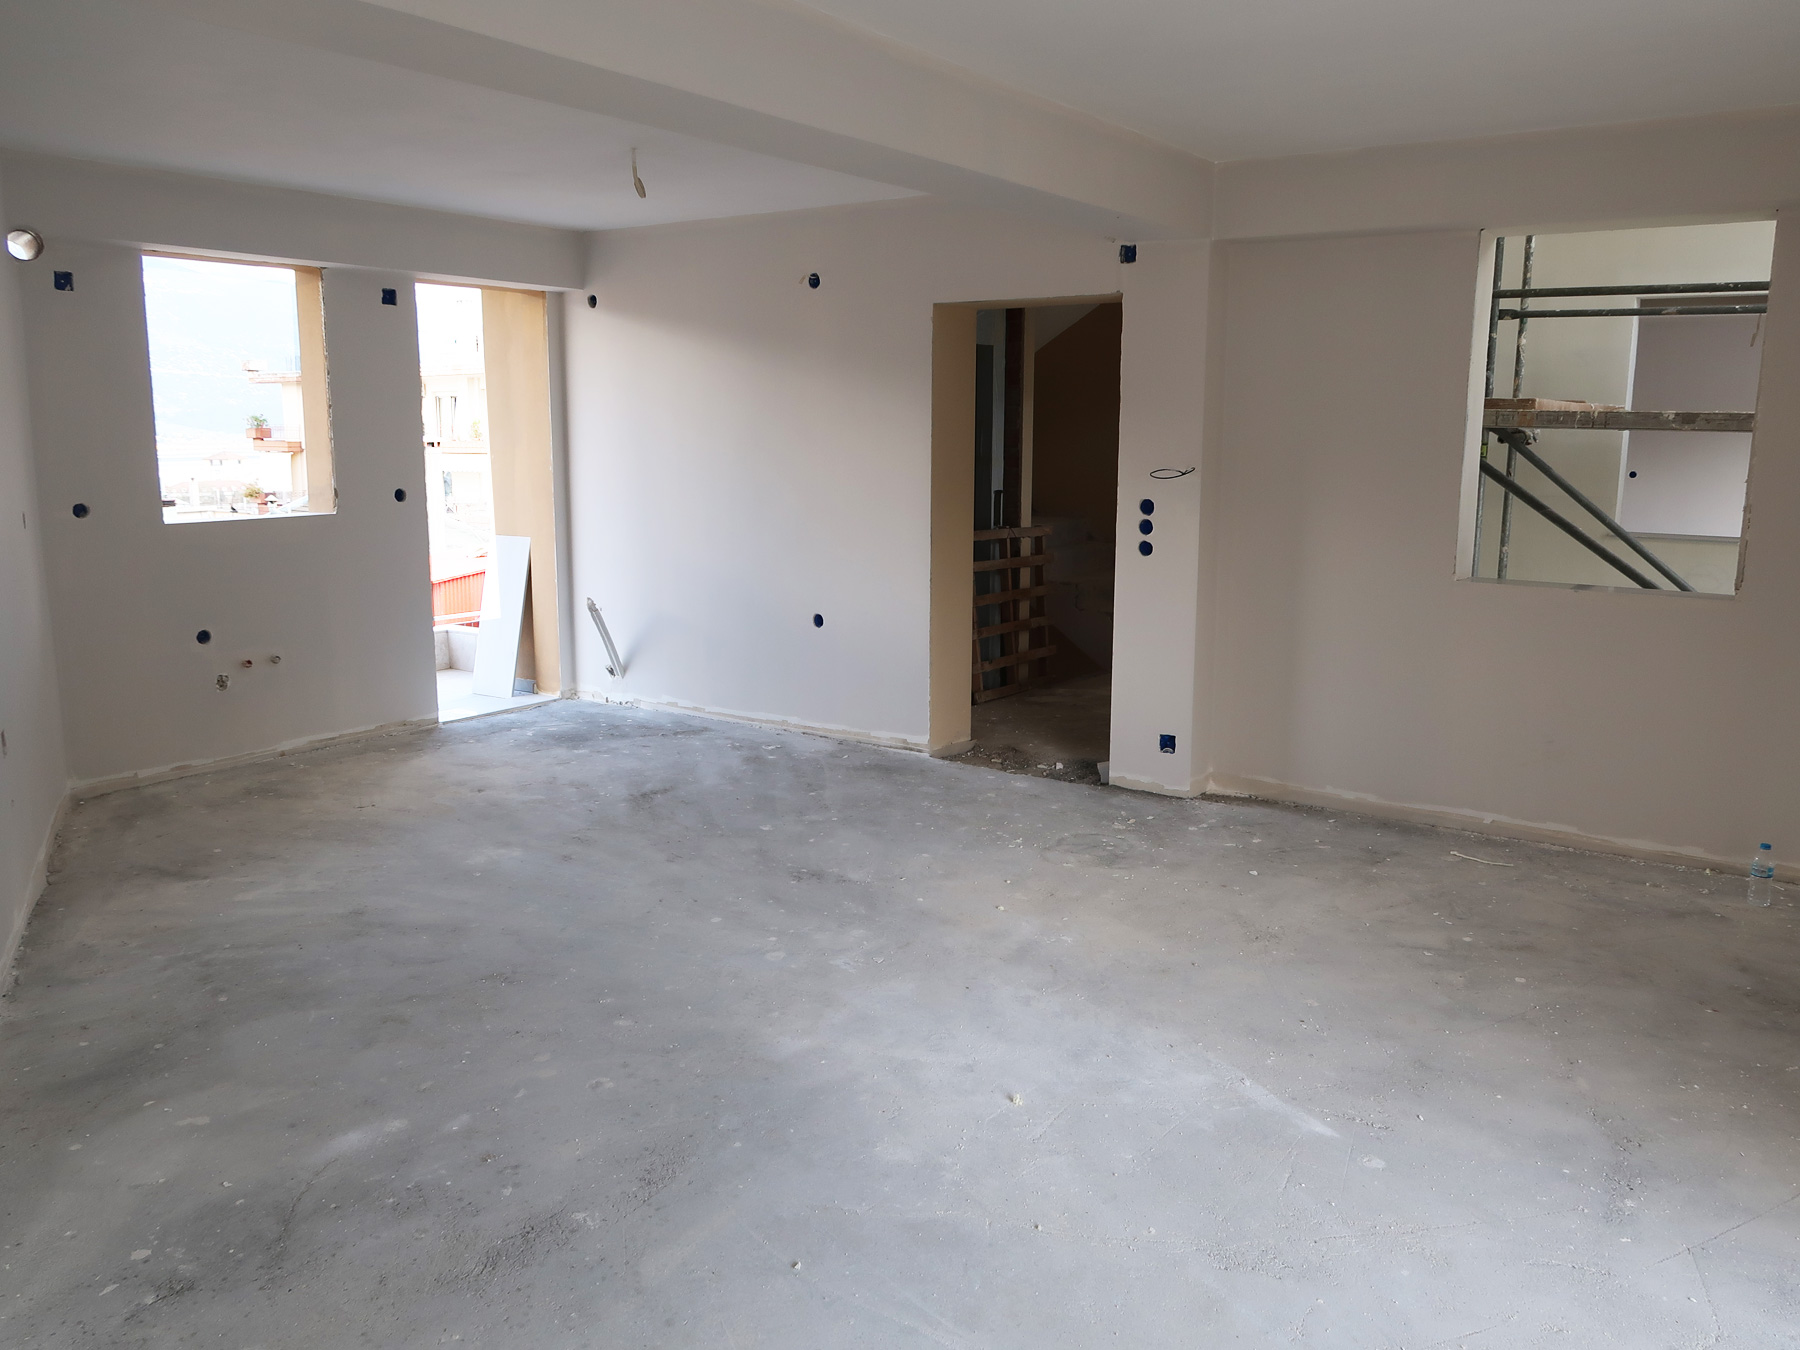 For sale, a new bright apartment of 77 sq.m. 1st floor with warehouse in Ampelokipis Ioannina